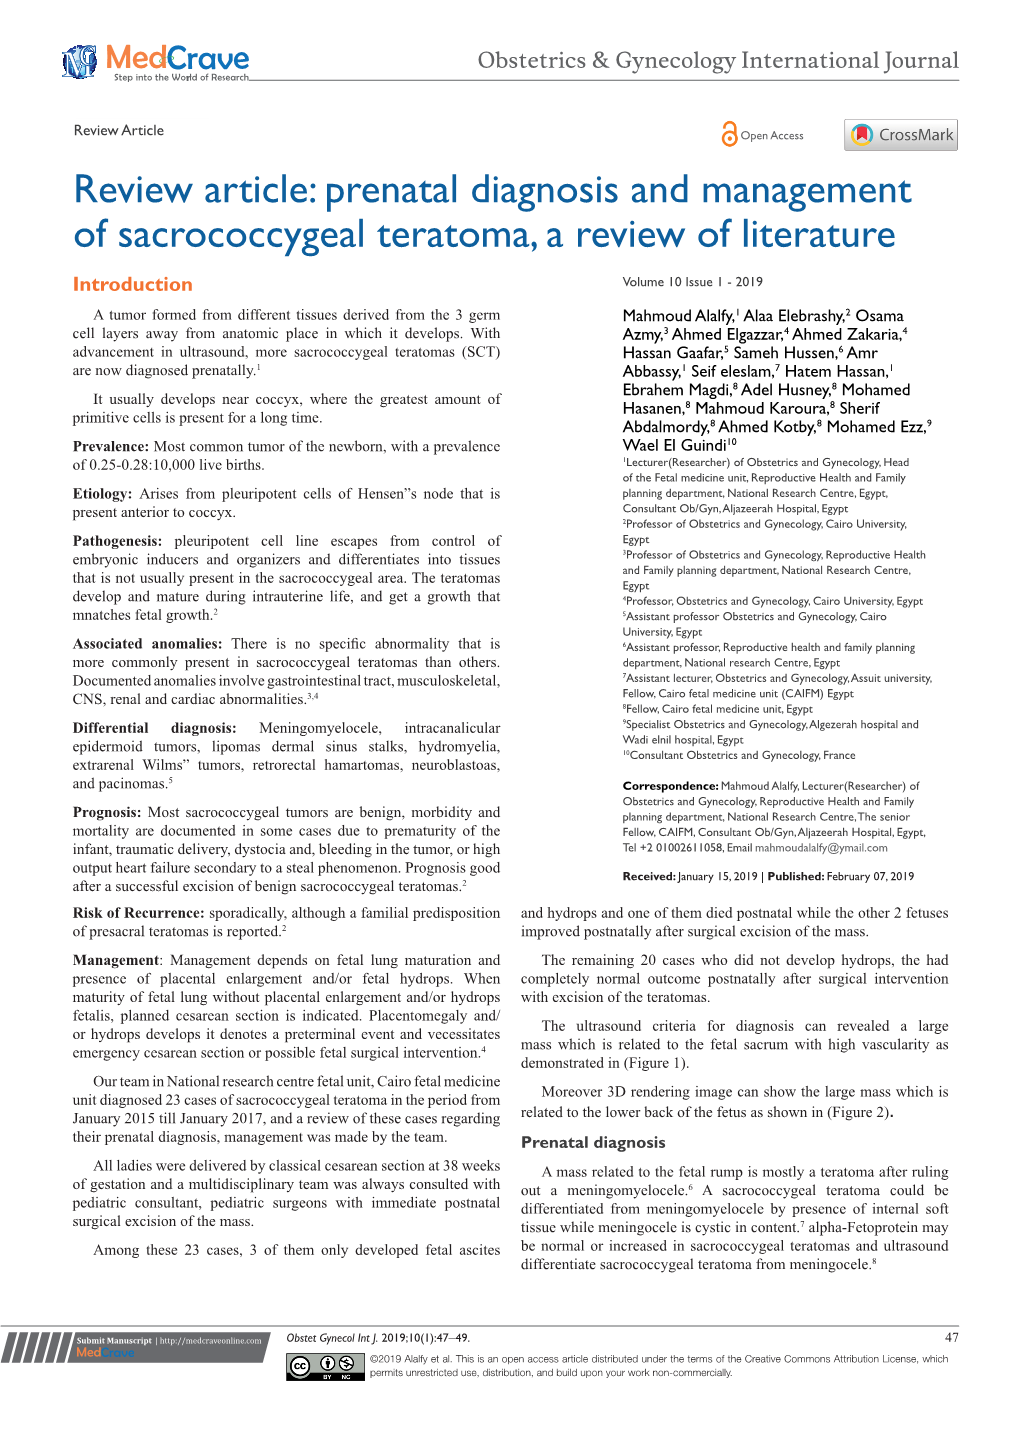 Prenatal Diagnosis and Management of Sacrococcygeal